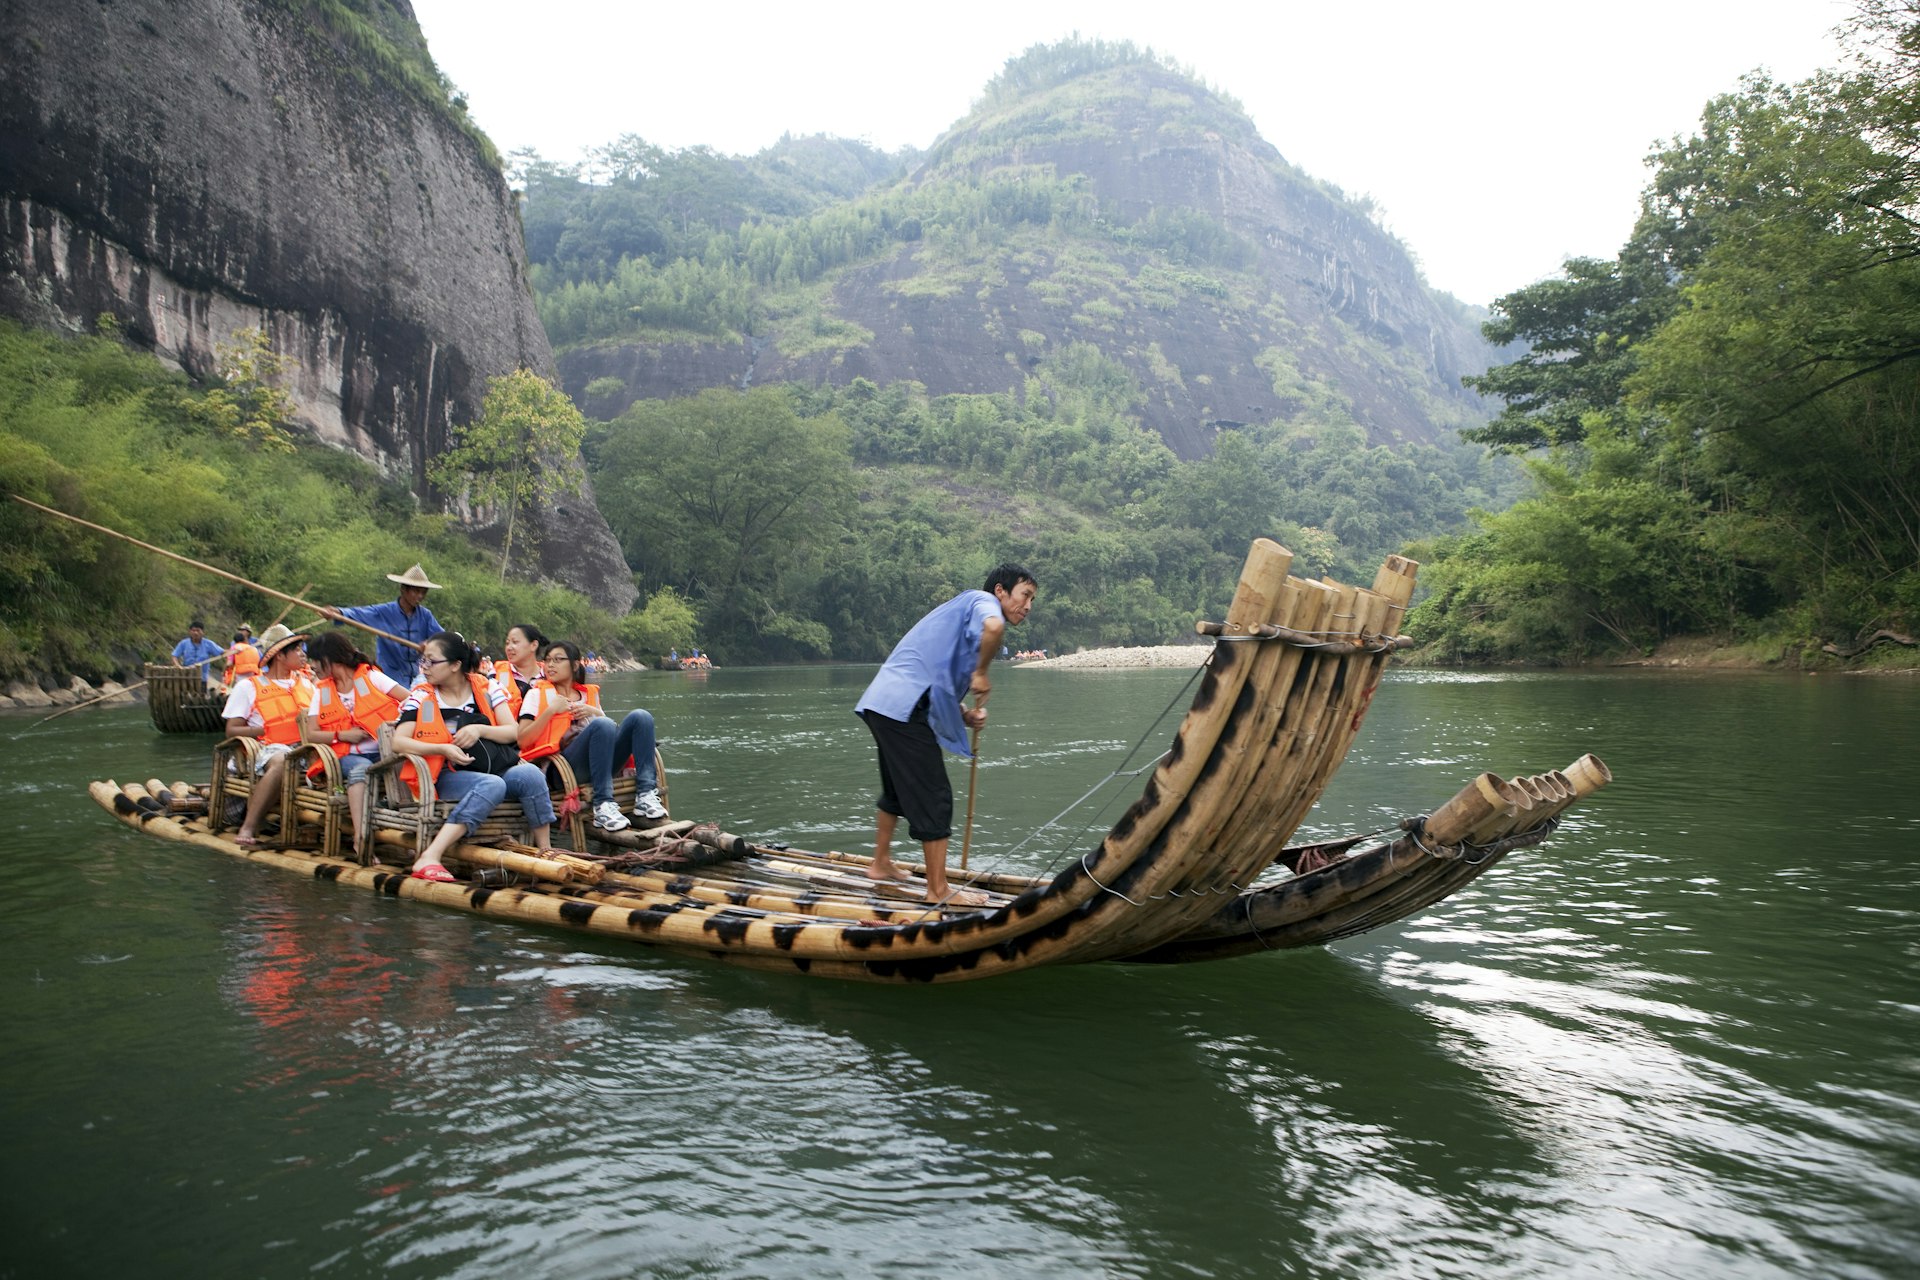 Two bamboo rafts, propelled by men in blue shirts, take a gaggle of visitors in orange life vests, along the Jiuqiu (Nine Bends) River in Wuyi Mountain National Park with tall mountains in the background